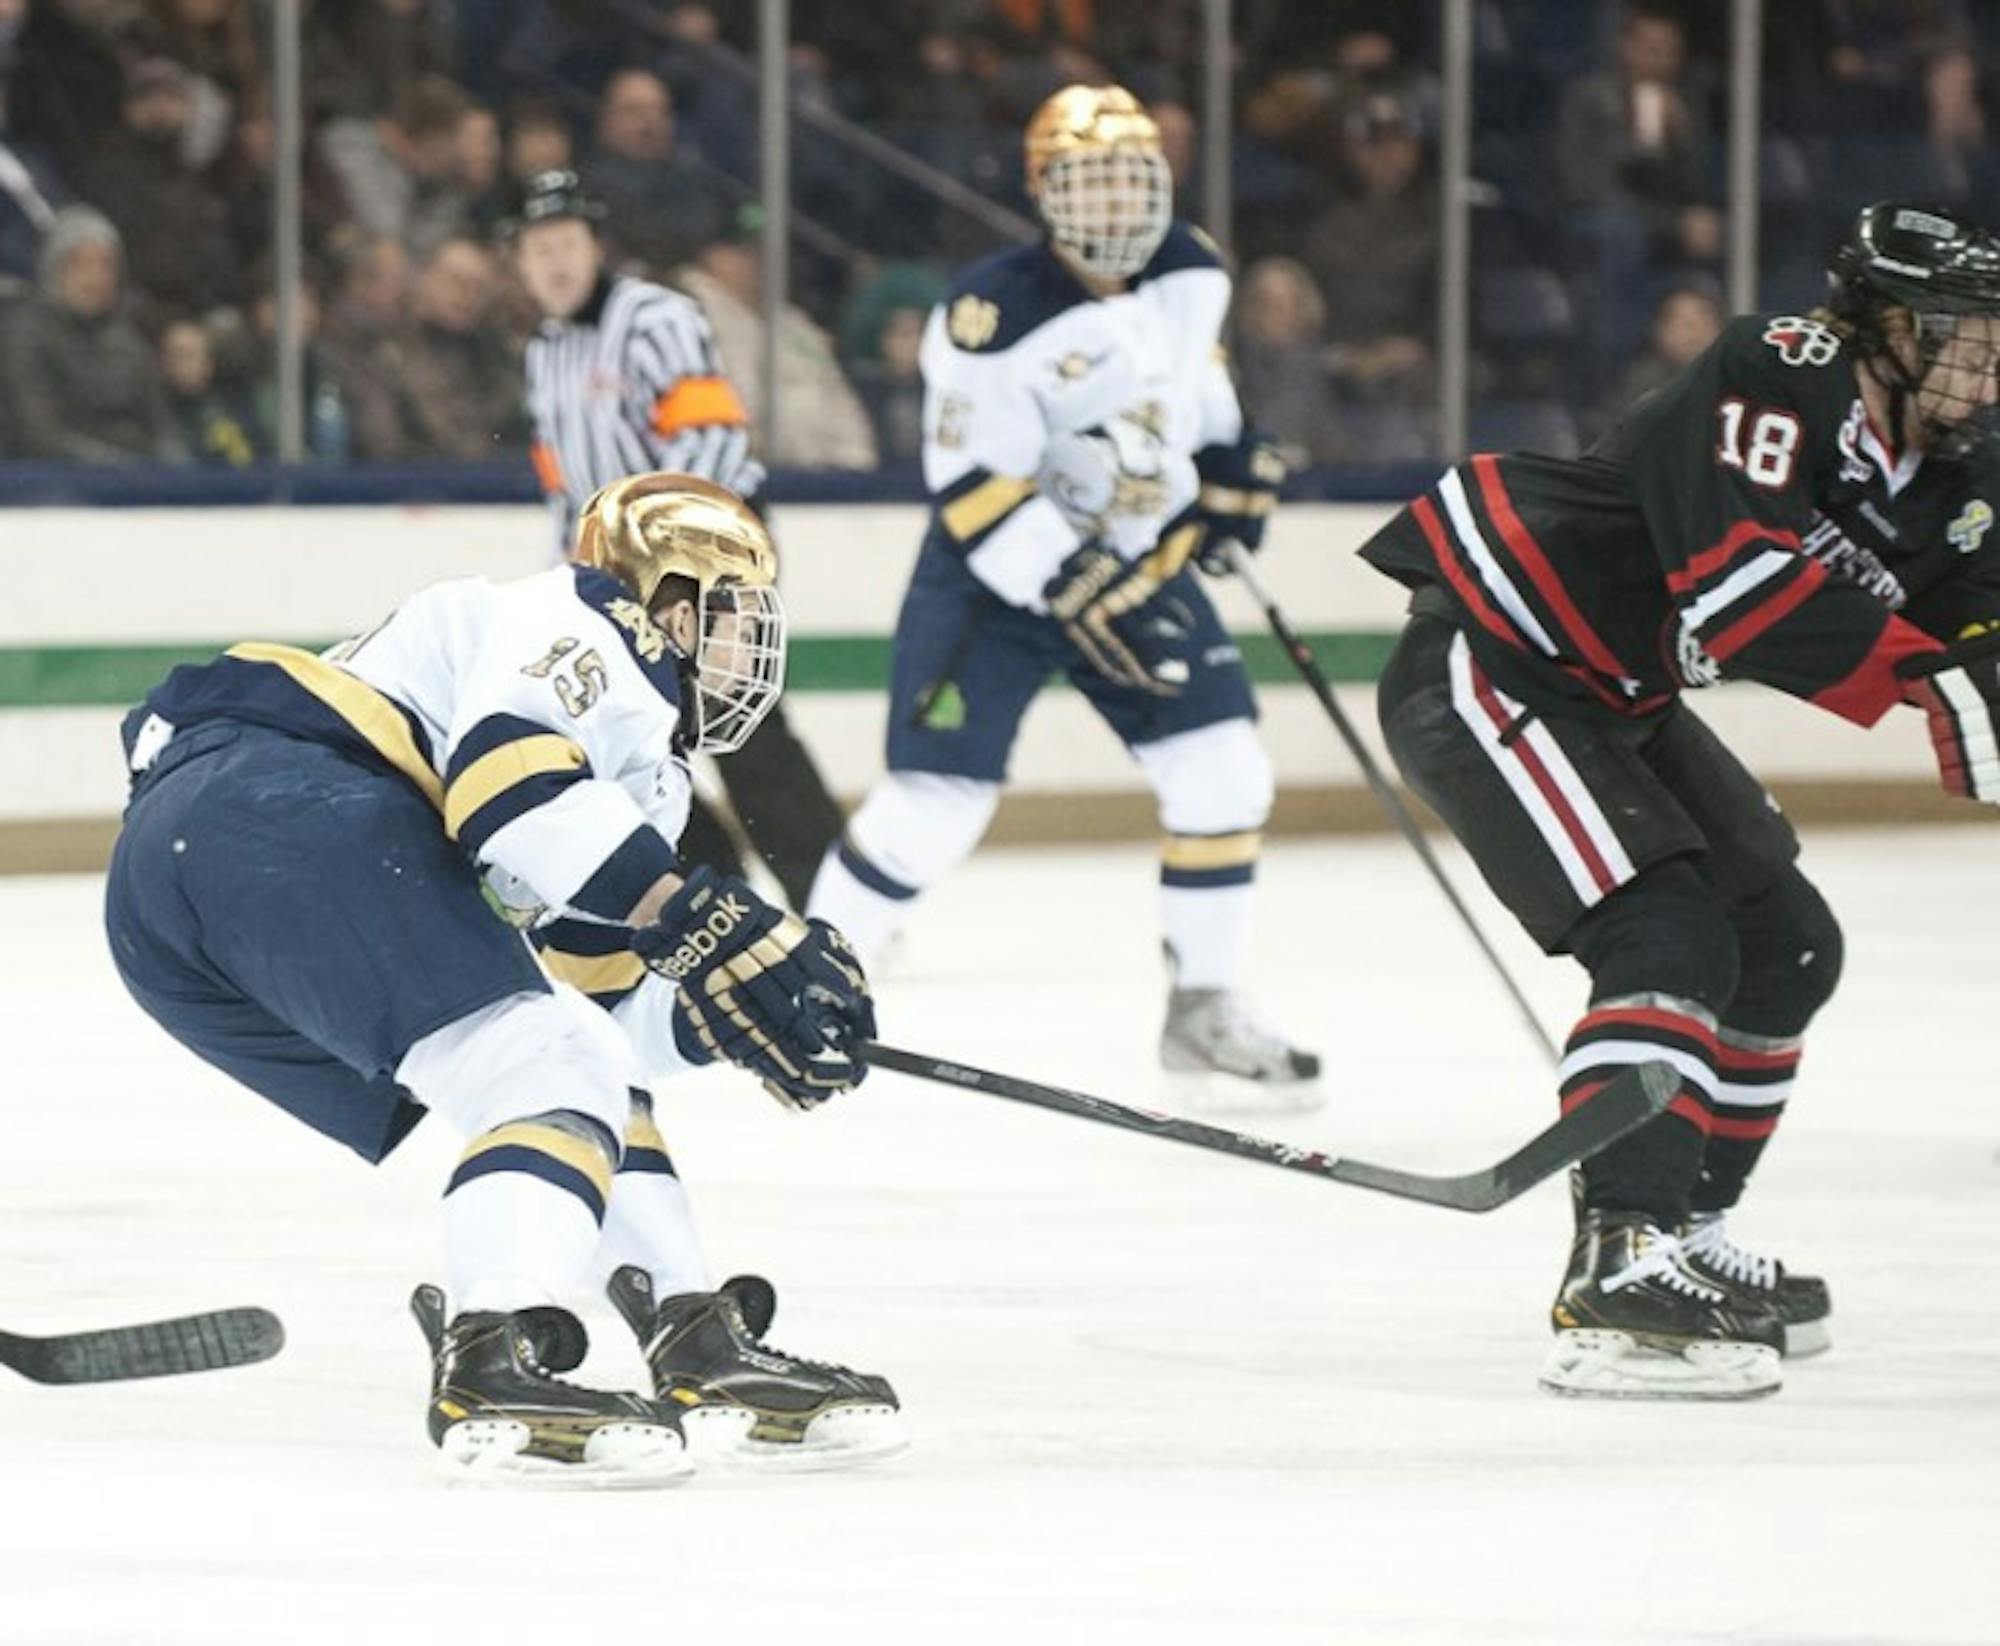 Irish junior right wing Peter Schneider pursues the puck during Notre Dame’s 4-0 loss to Northeastern on Friday.